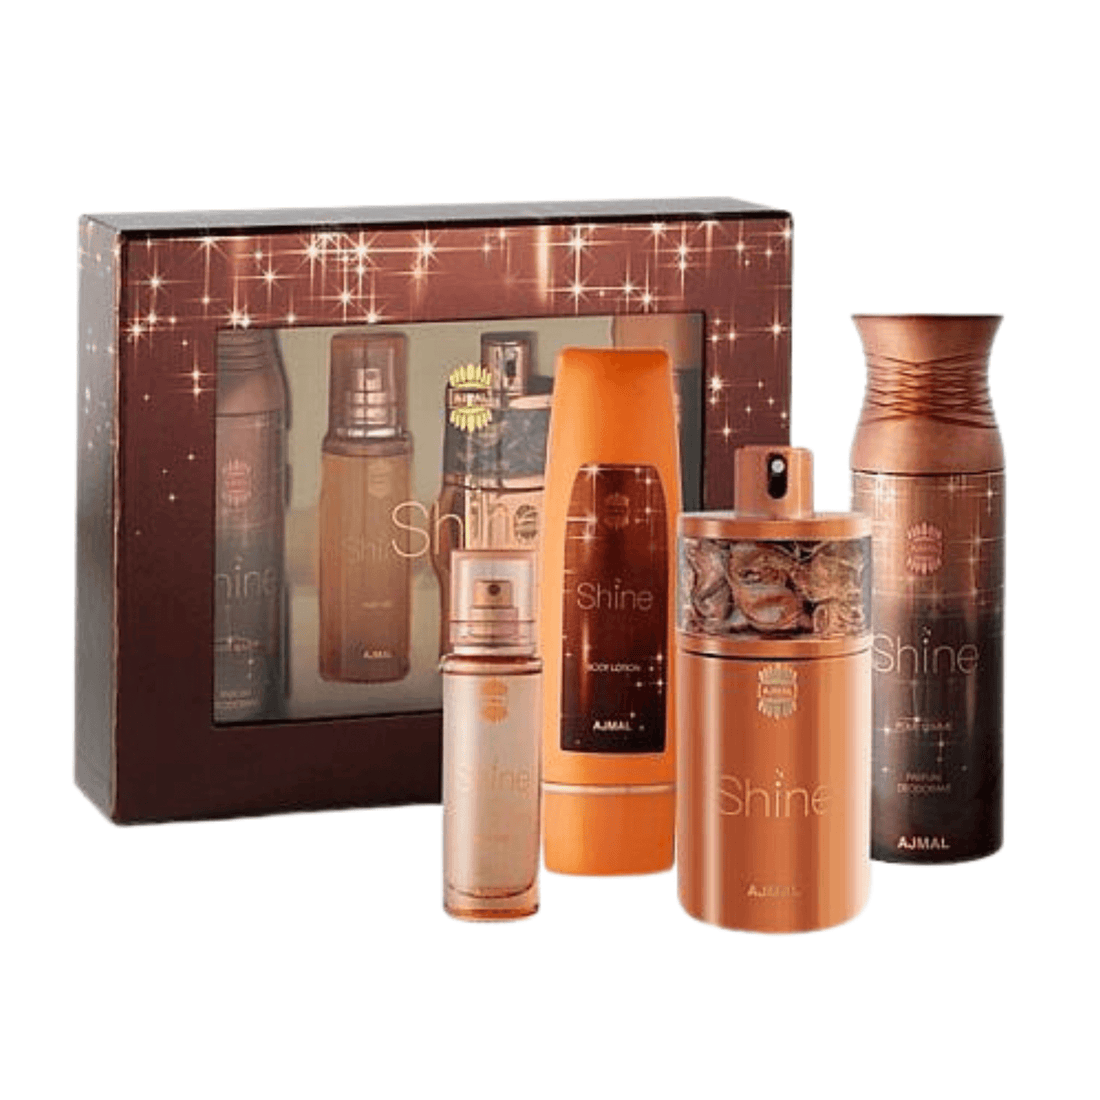  AJMAL Shine Gift Set for Women - Radiant Scents & Ideal Gifts